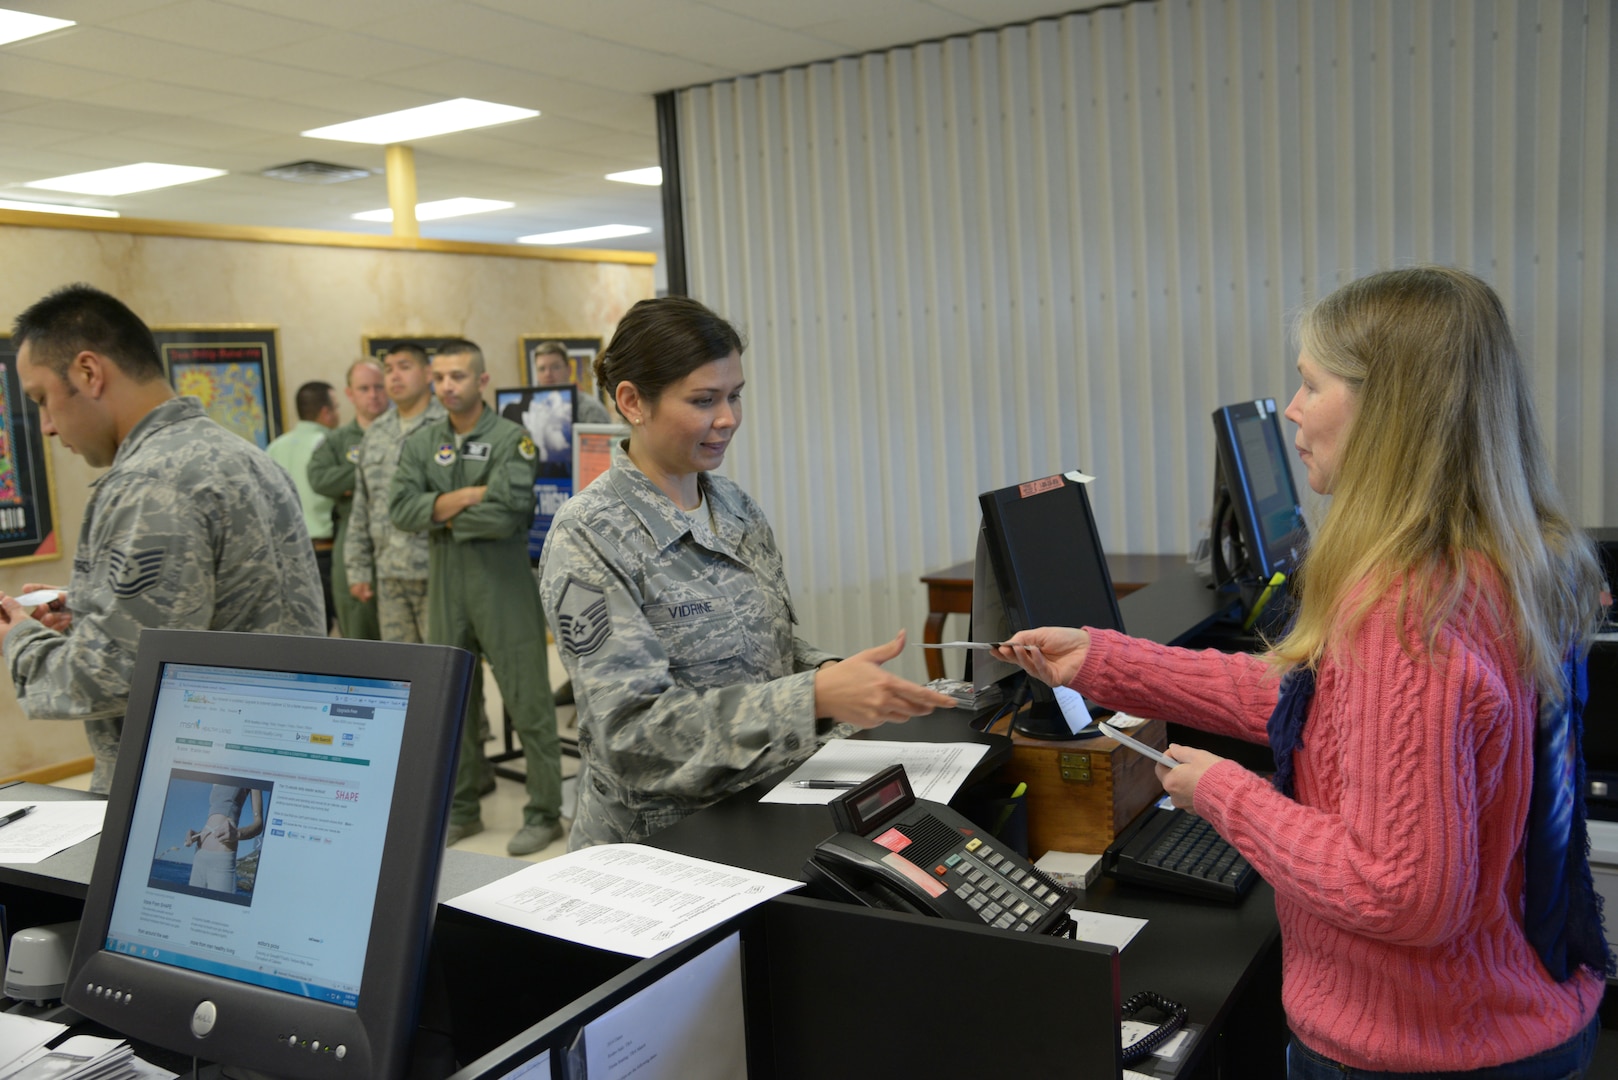 Master Sgt. Cindy Vidrine (left) purchases tickets April 17 from Jennifer Myers, Community
Services Mall employee, at Joint Base San Antonio-Randolph. (U.S. Air Force photo by Joel Martinez)